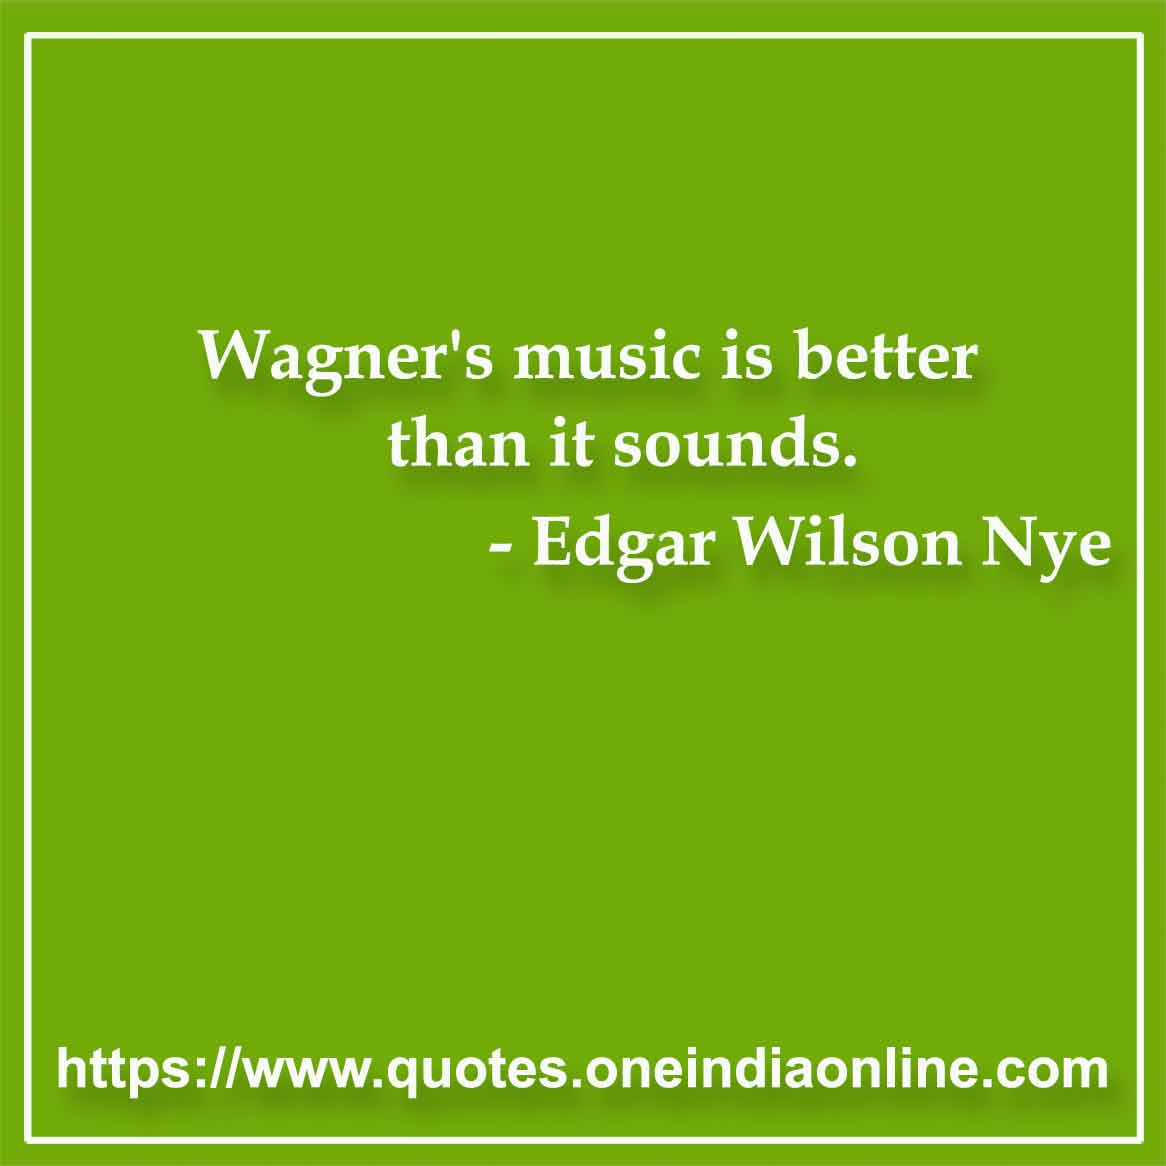 Wagner's music is better than it sounds.

- Music Quotes by Edgar Wilson Nye 